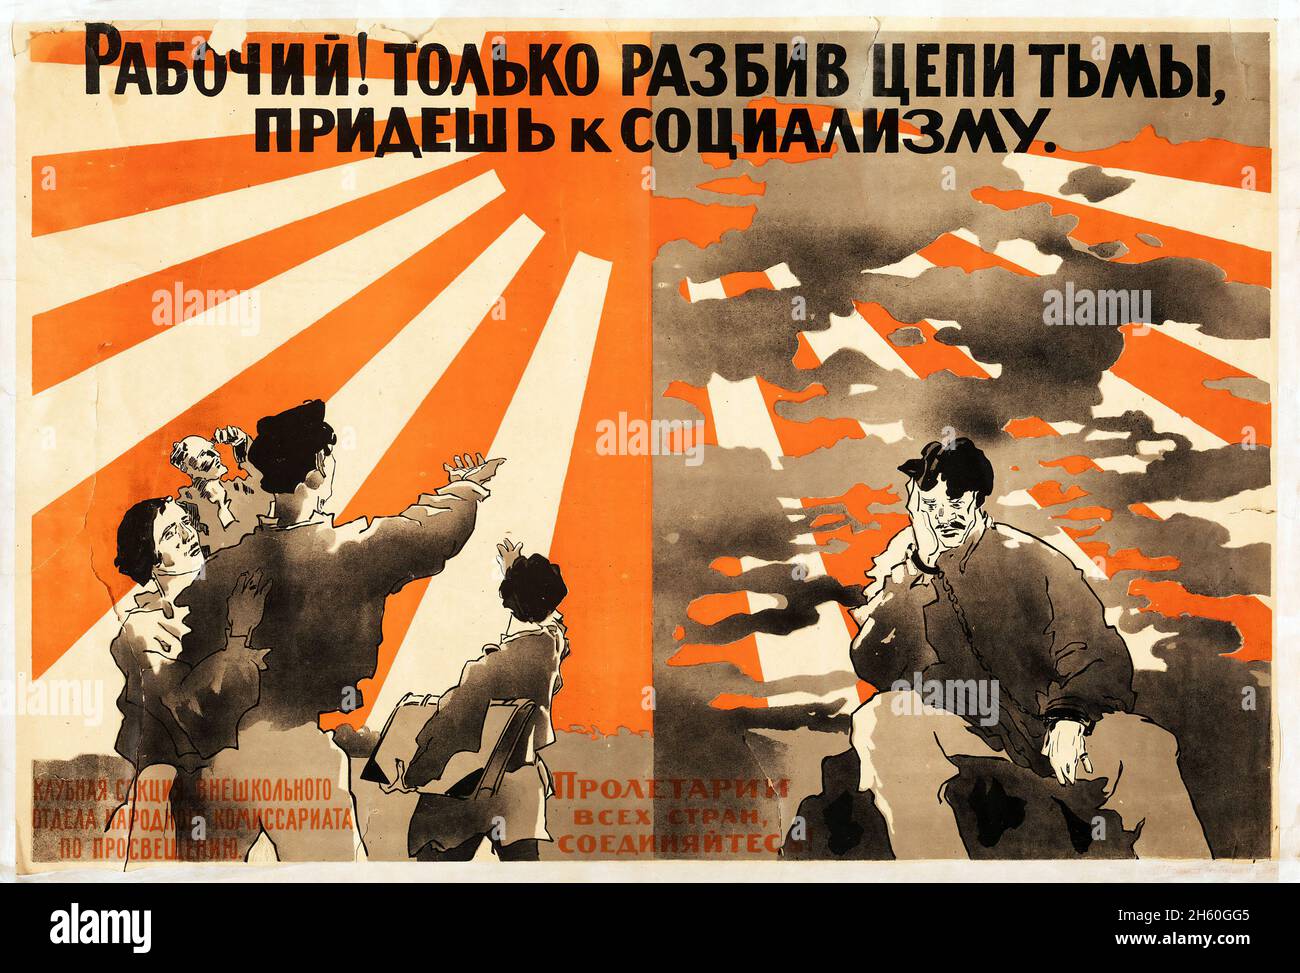 Worker! Only After Breaking the Chains of Darkness Will You Come to Socialism! (1919) Russian propaganda. Stock Photo